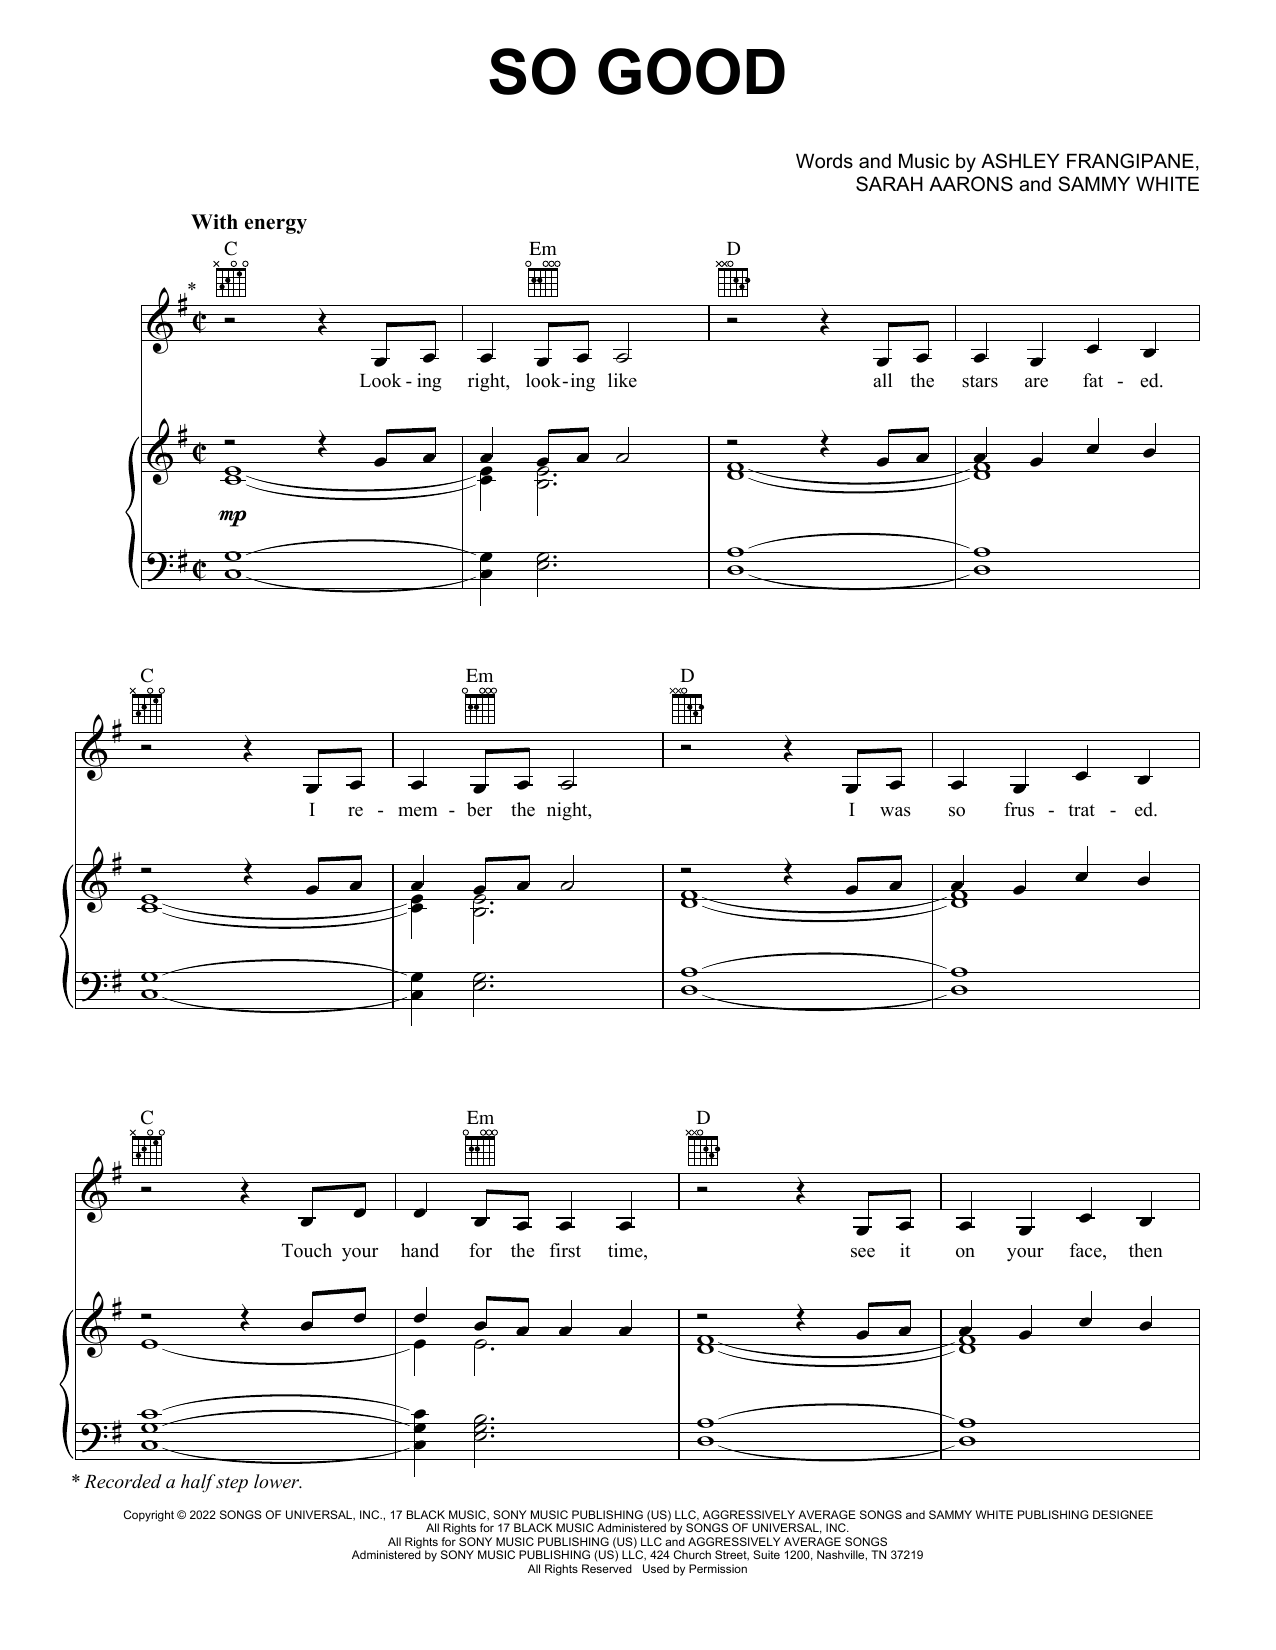 Halsey So Good sheet music notes and chords. Download Printable PDF.